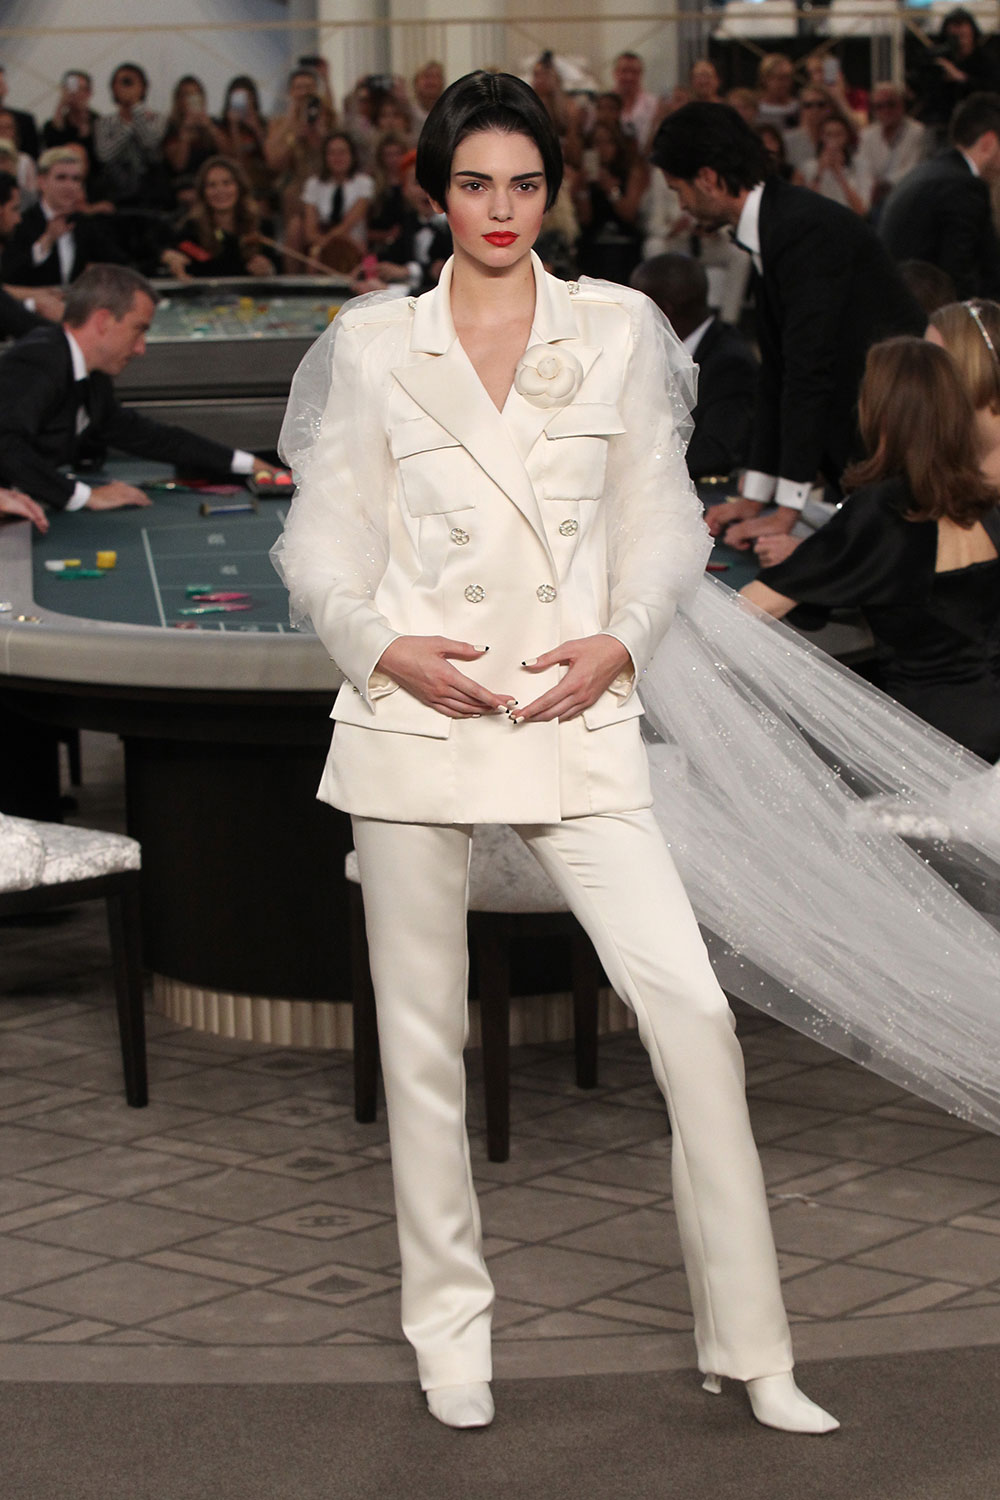 Look 67 from the Chanel show at Paris Fashion Week Haute Couture FW 2015/2016. Photo / Getty Images